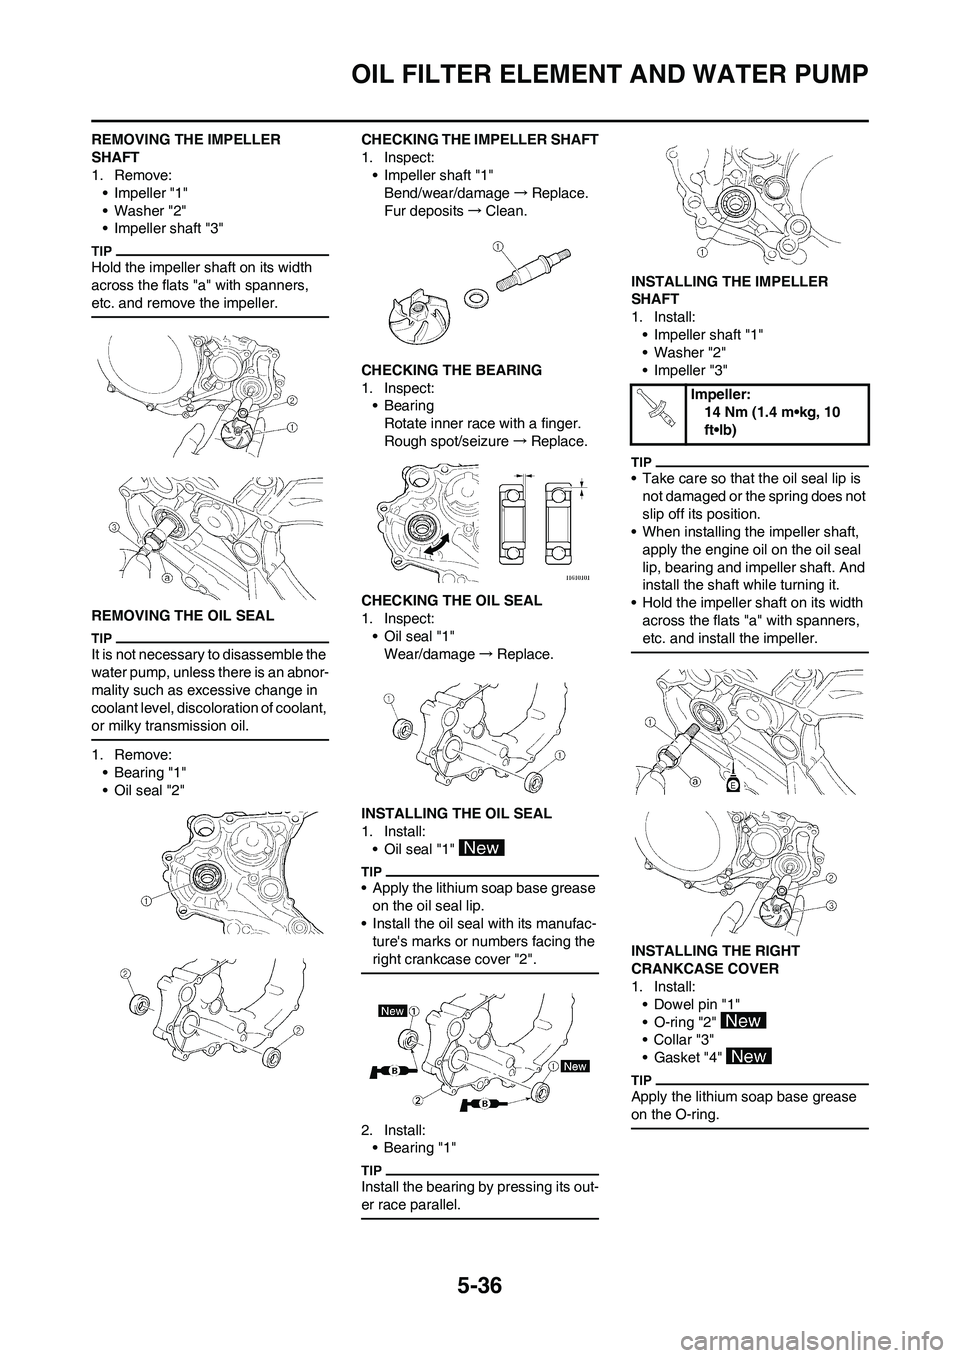 YAMAHA WR 450F 2010 Owners Guide 5-36
OIL FILTER ELEMENT AND WATER PUMP
REMOVING THE IMPELLER 
SHAFT
1. Remove:
• Impeller "1"
• Washer "2"
• Impeller shaft "3"
Hold the impeller shaft on its width 
across the flats "a" with sp